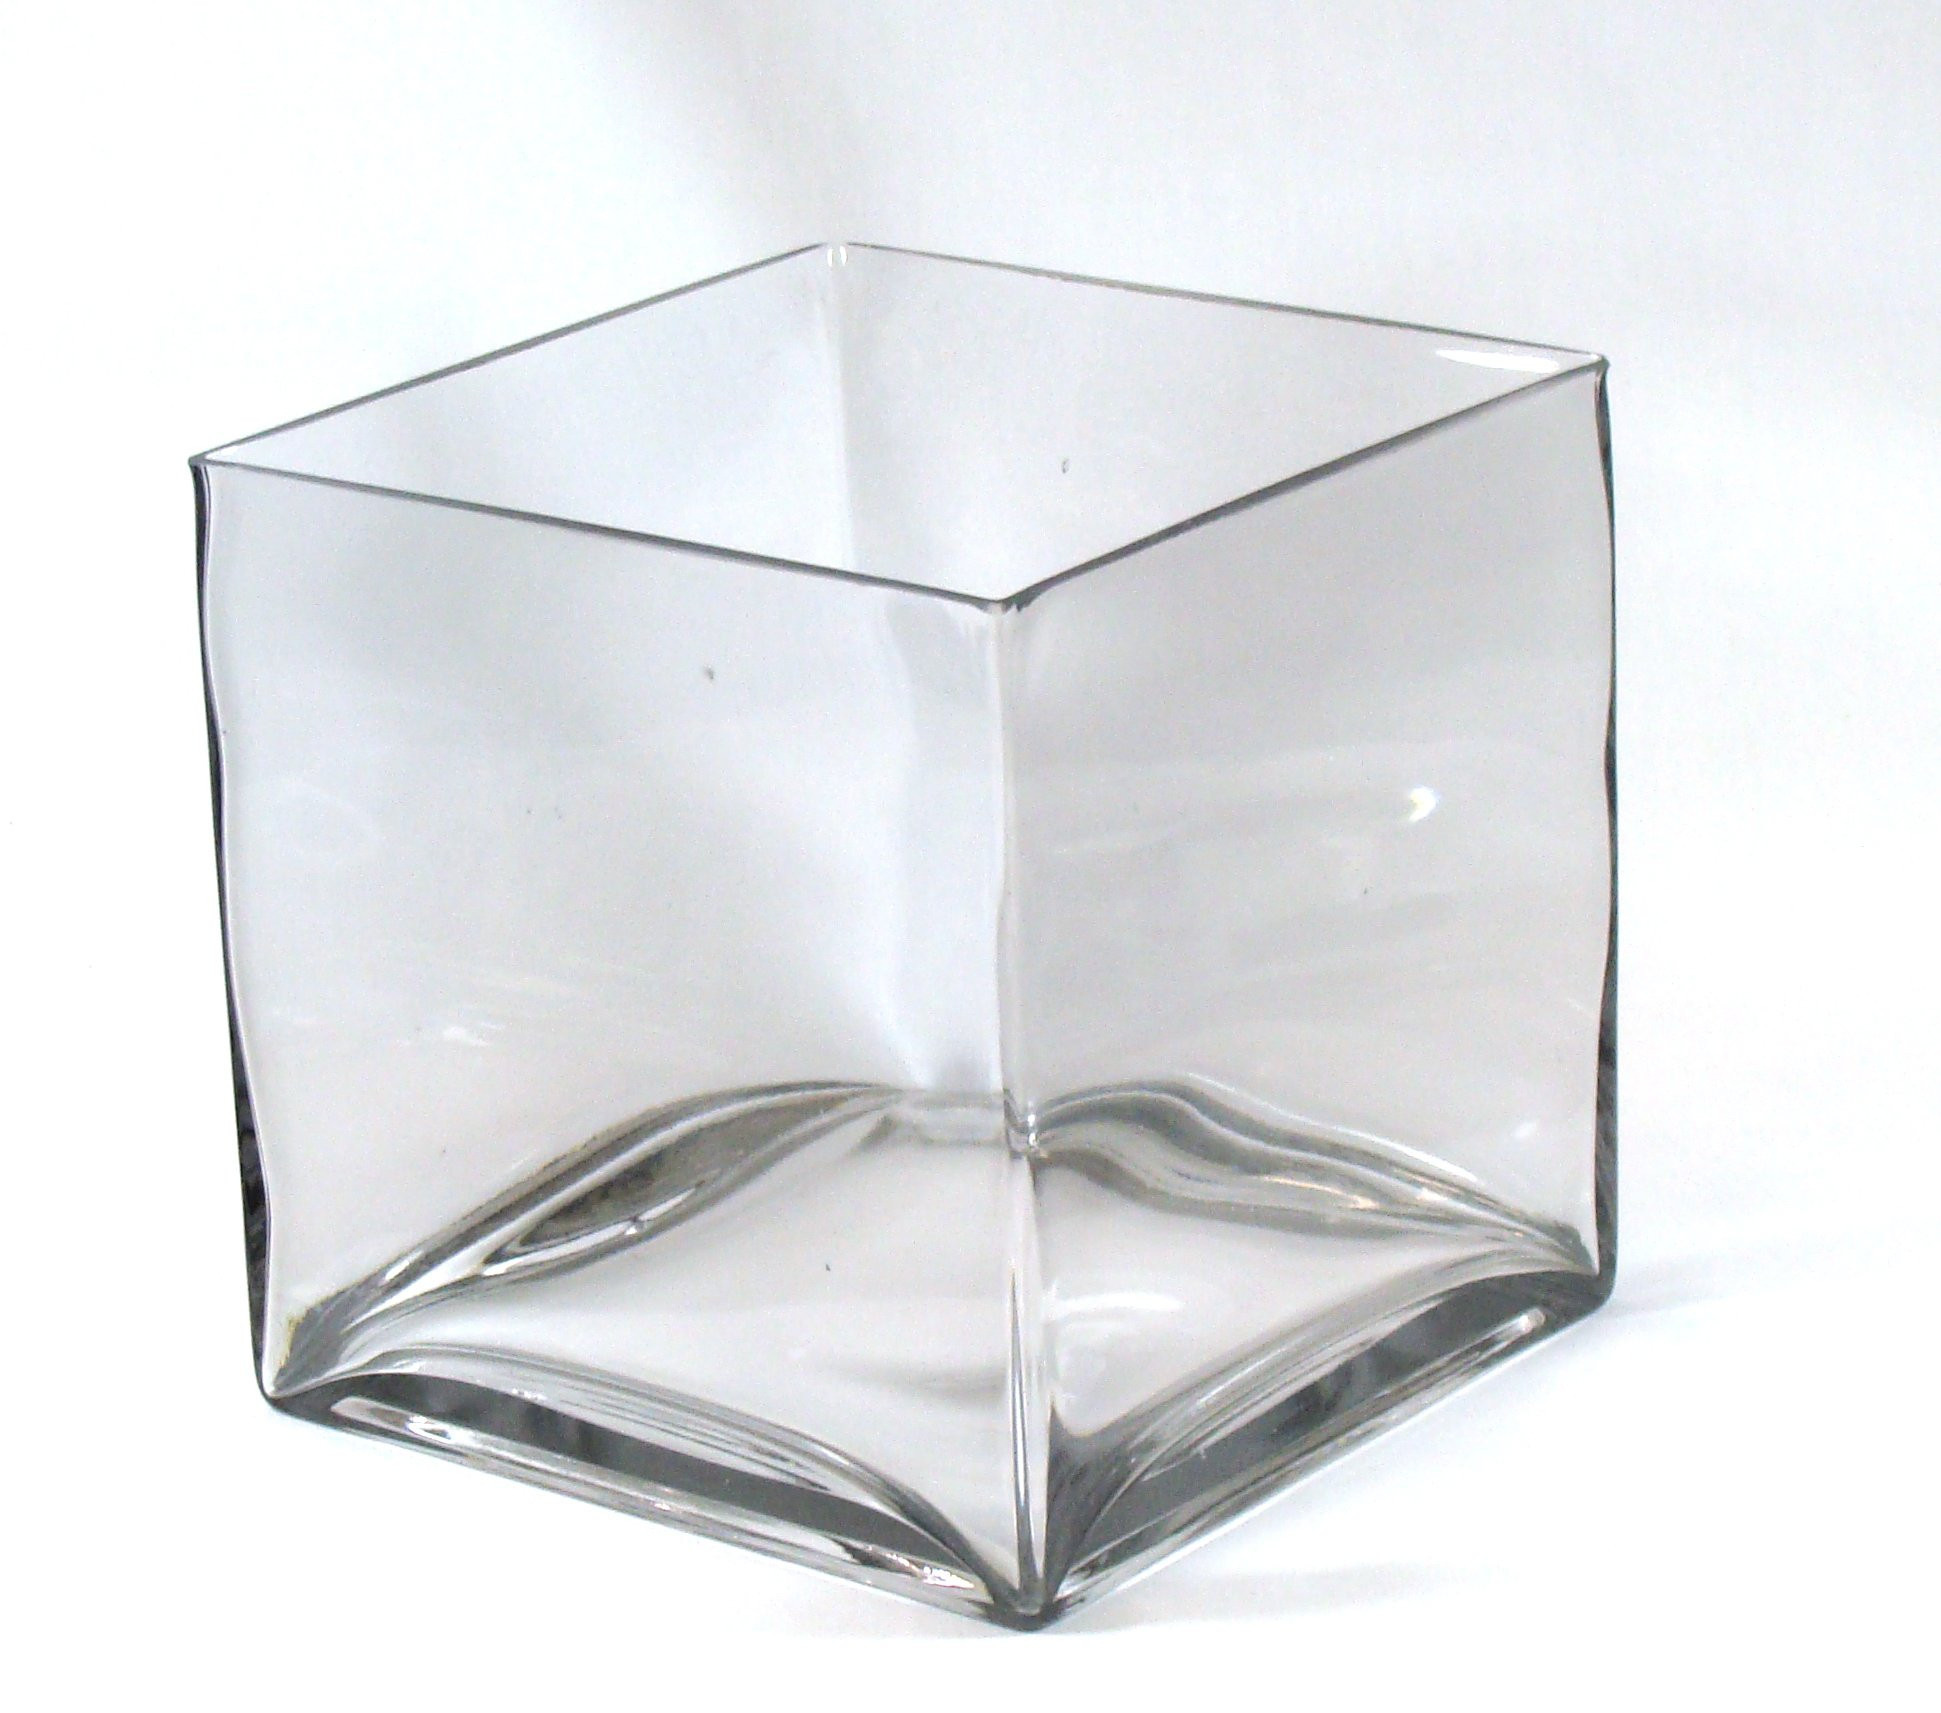 10 Great 4 Square Glass Vase 2024 free download 4 square glass vase of buy 8 inch round large glass vase 8 clear cylinder oversize for 8 square large glass vase 8 inch clear cube oversize centerpiece 8x8x8 candleholder